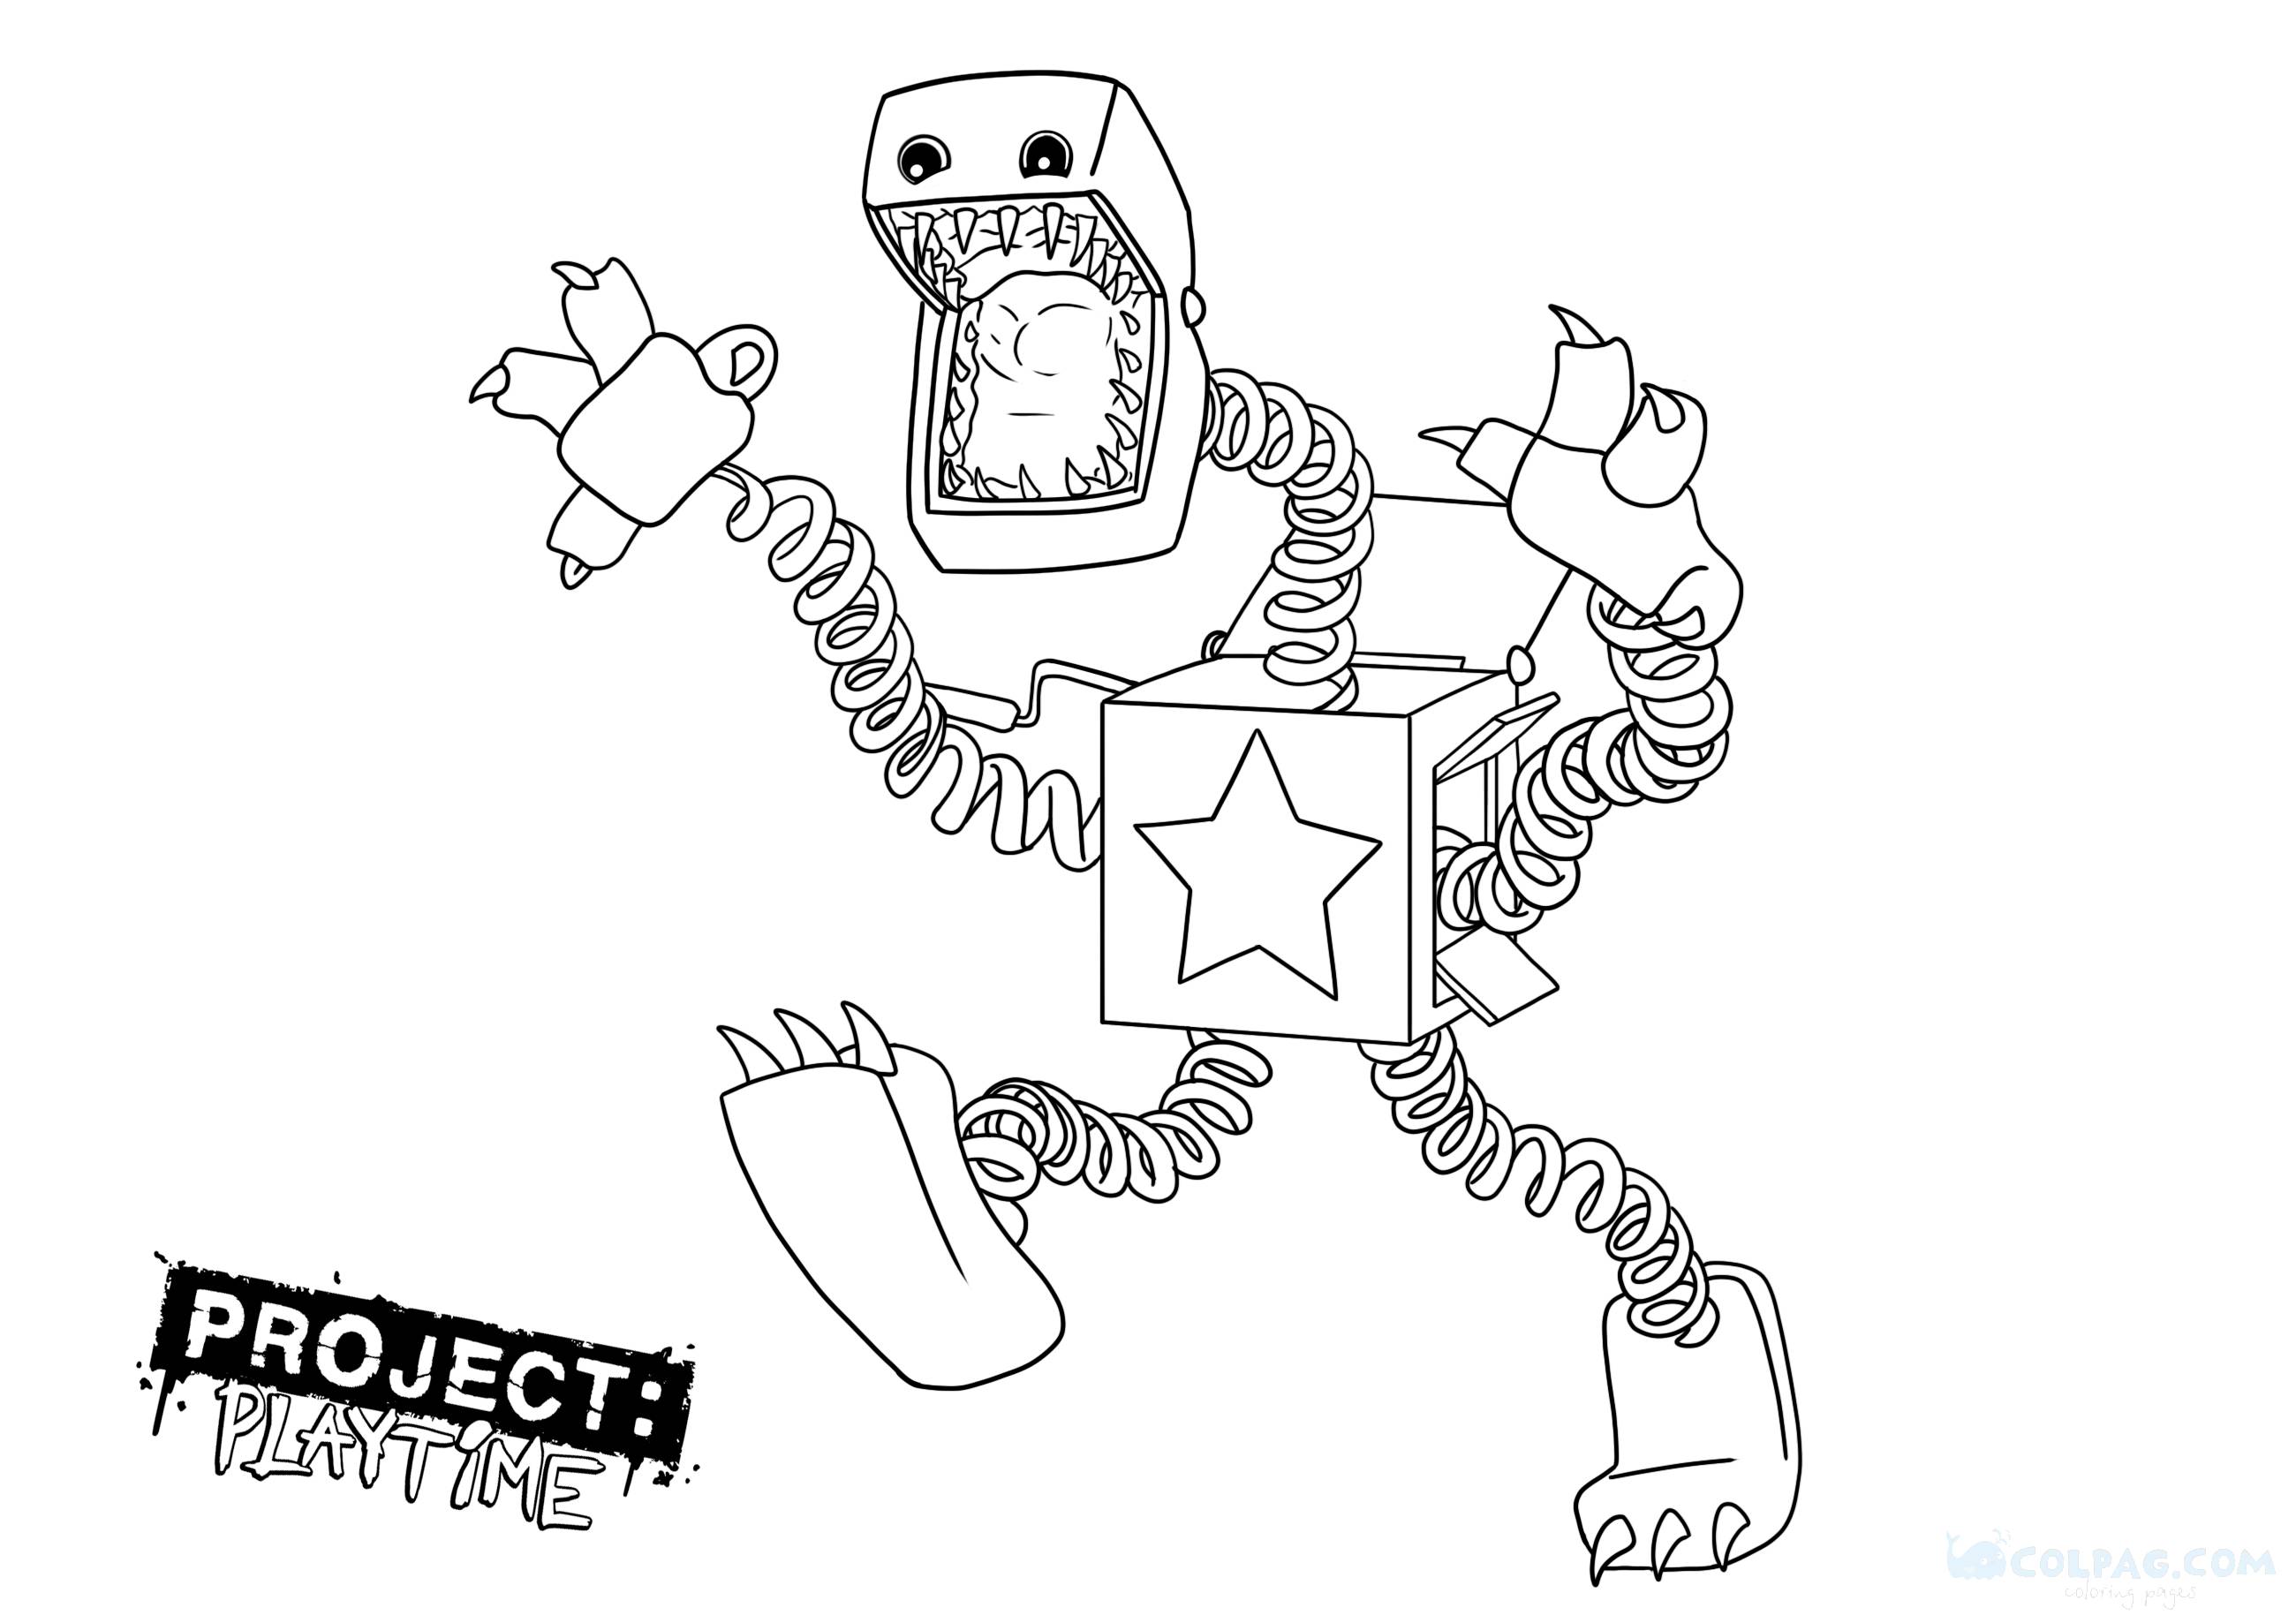 boxy-boo-project-playtime-coloring-page-colpag-com-18